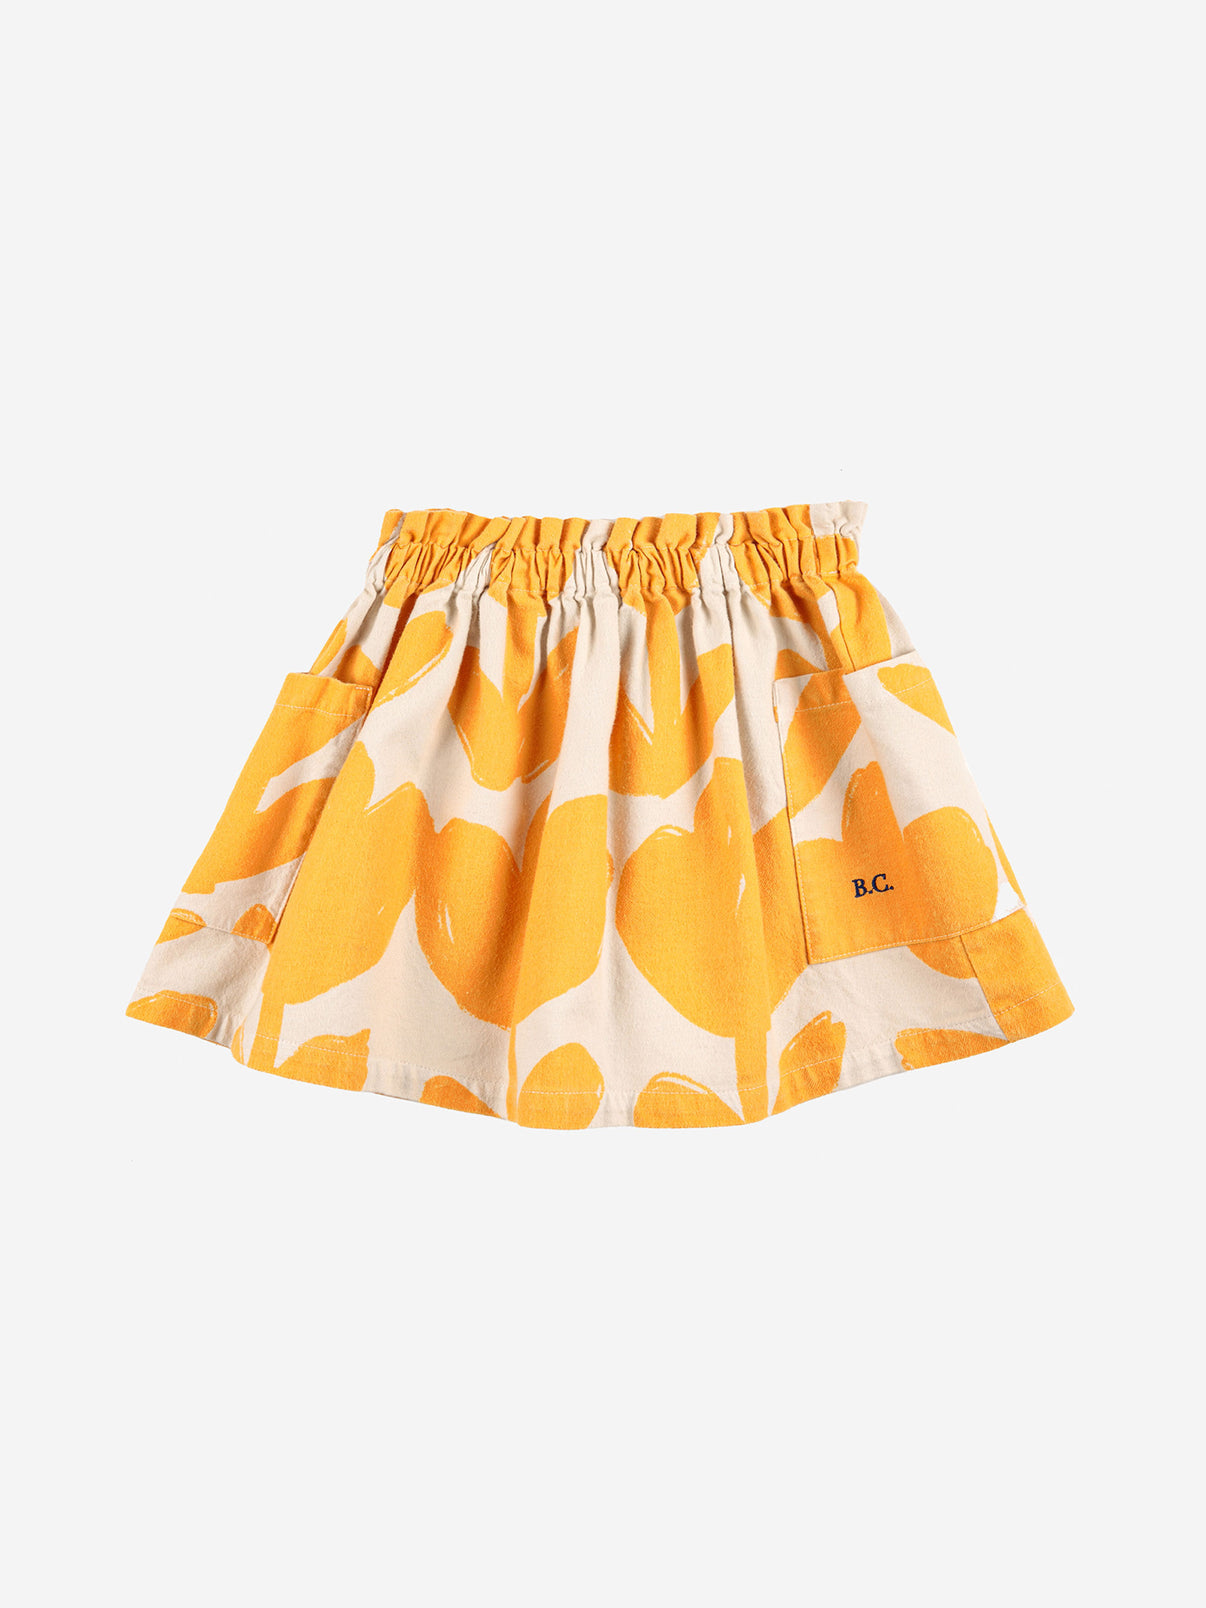 Big Flowers Woven Skirt by Bobo Choses. 100% cotton off white knee length skirt. Designed with elasticated waistband, patched side pocket, embroidery and over knee length. Made ethically and sustainably in Spain for Bobo Choses.